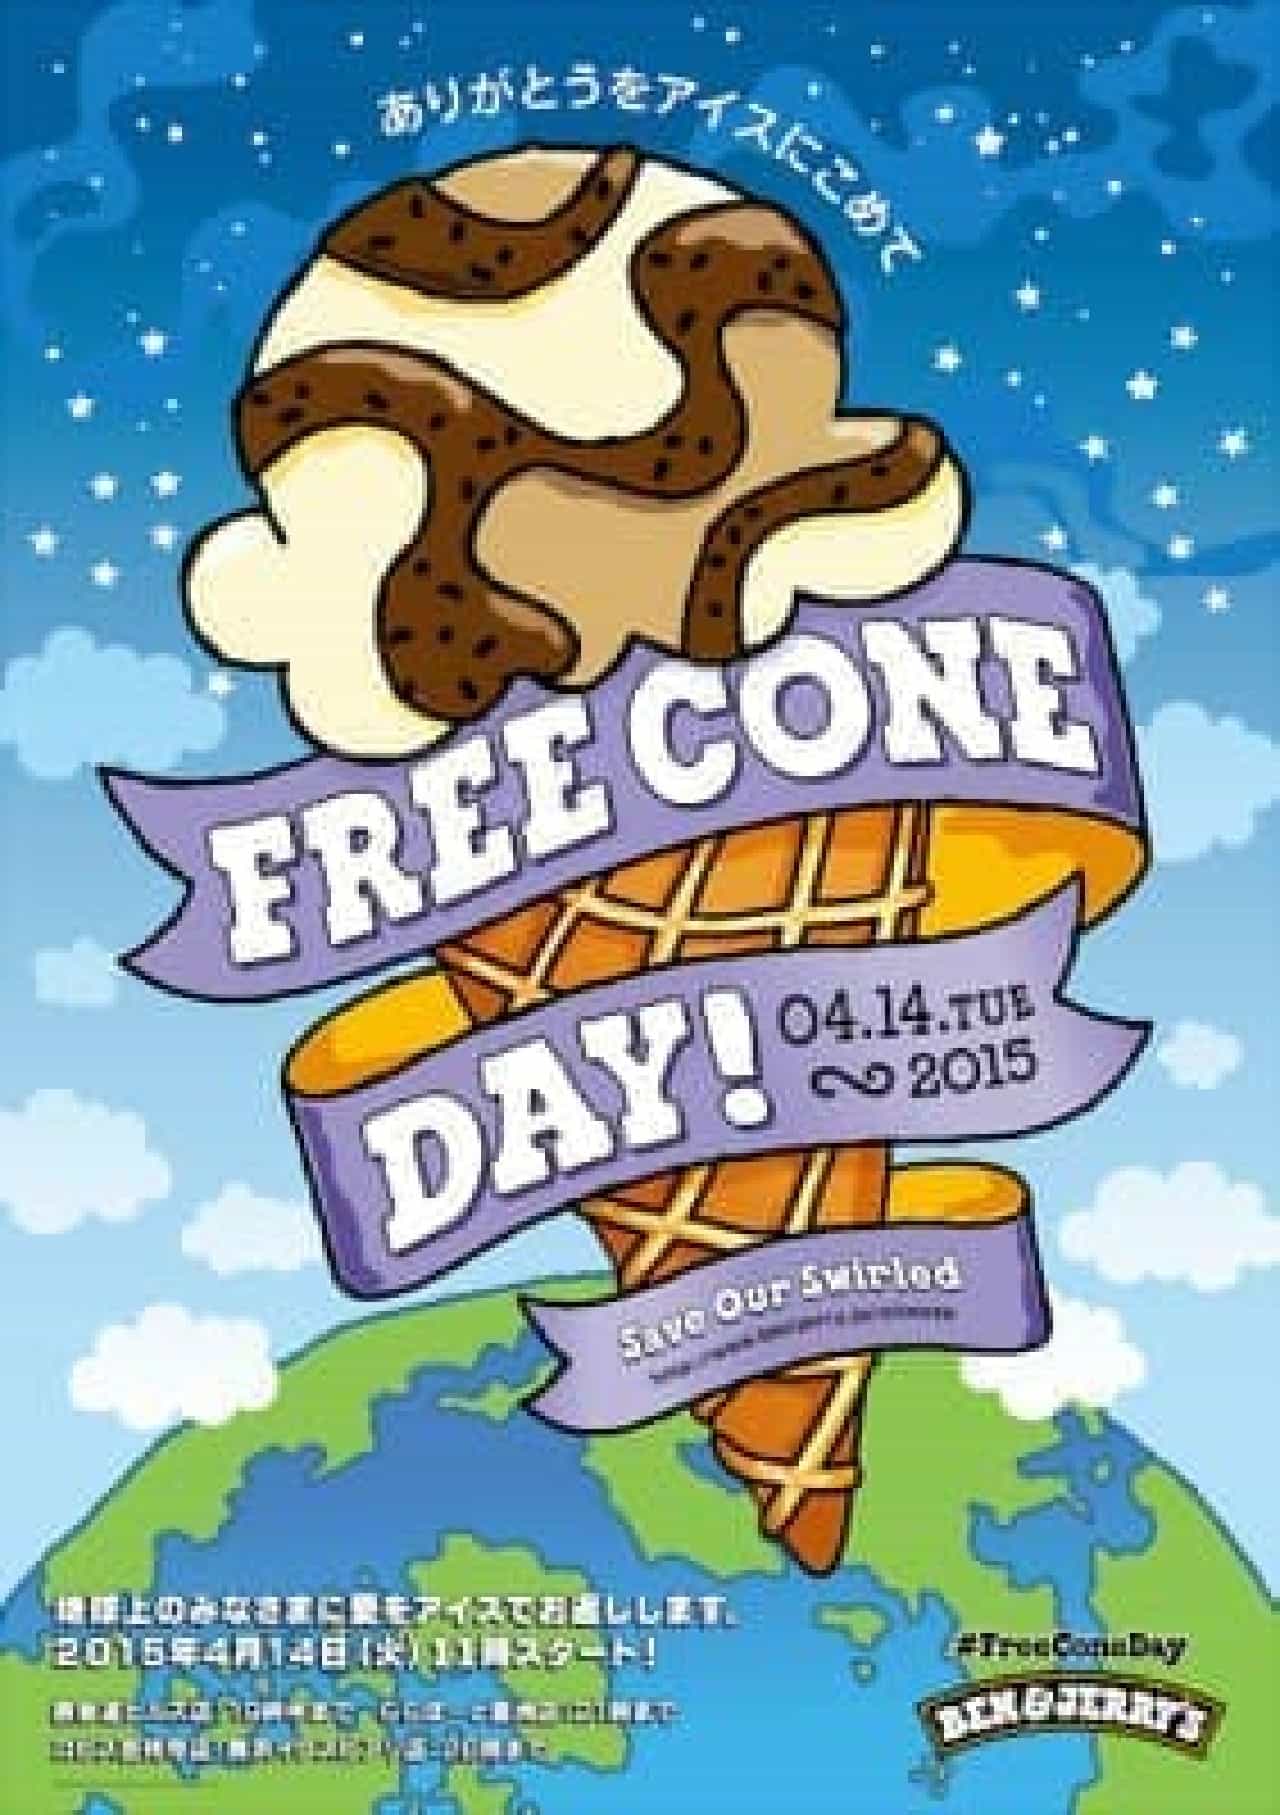 Ben & Jerry's "Free Corn Day" is back again this year!